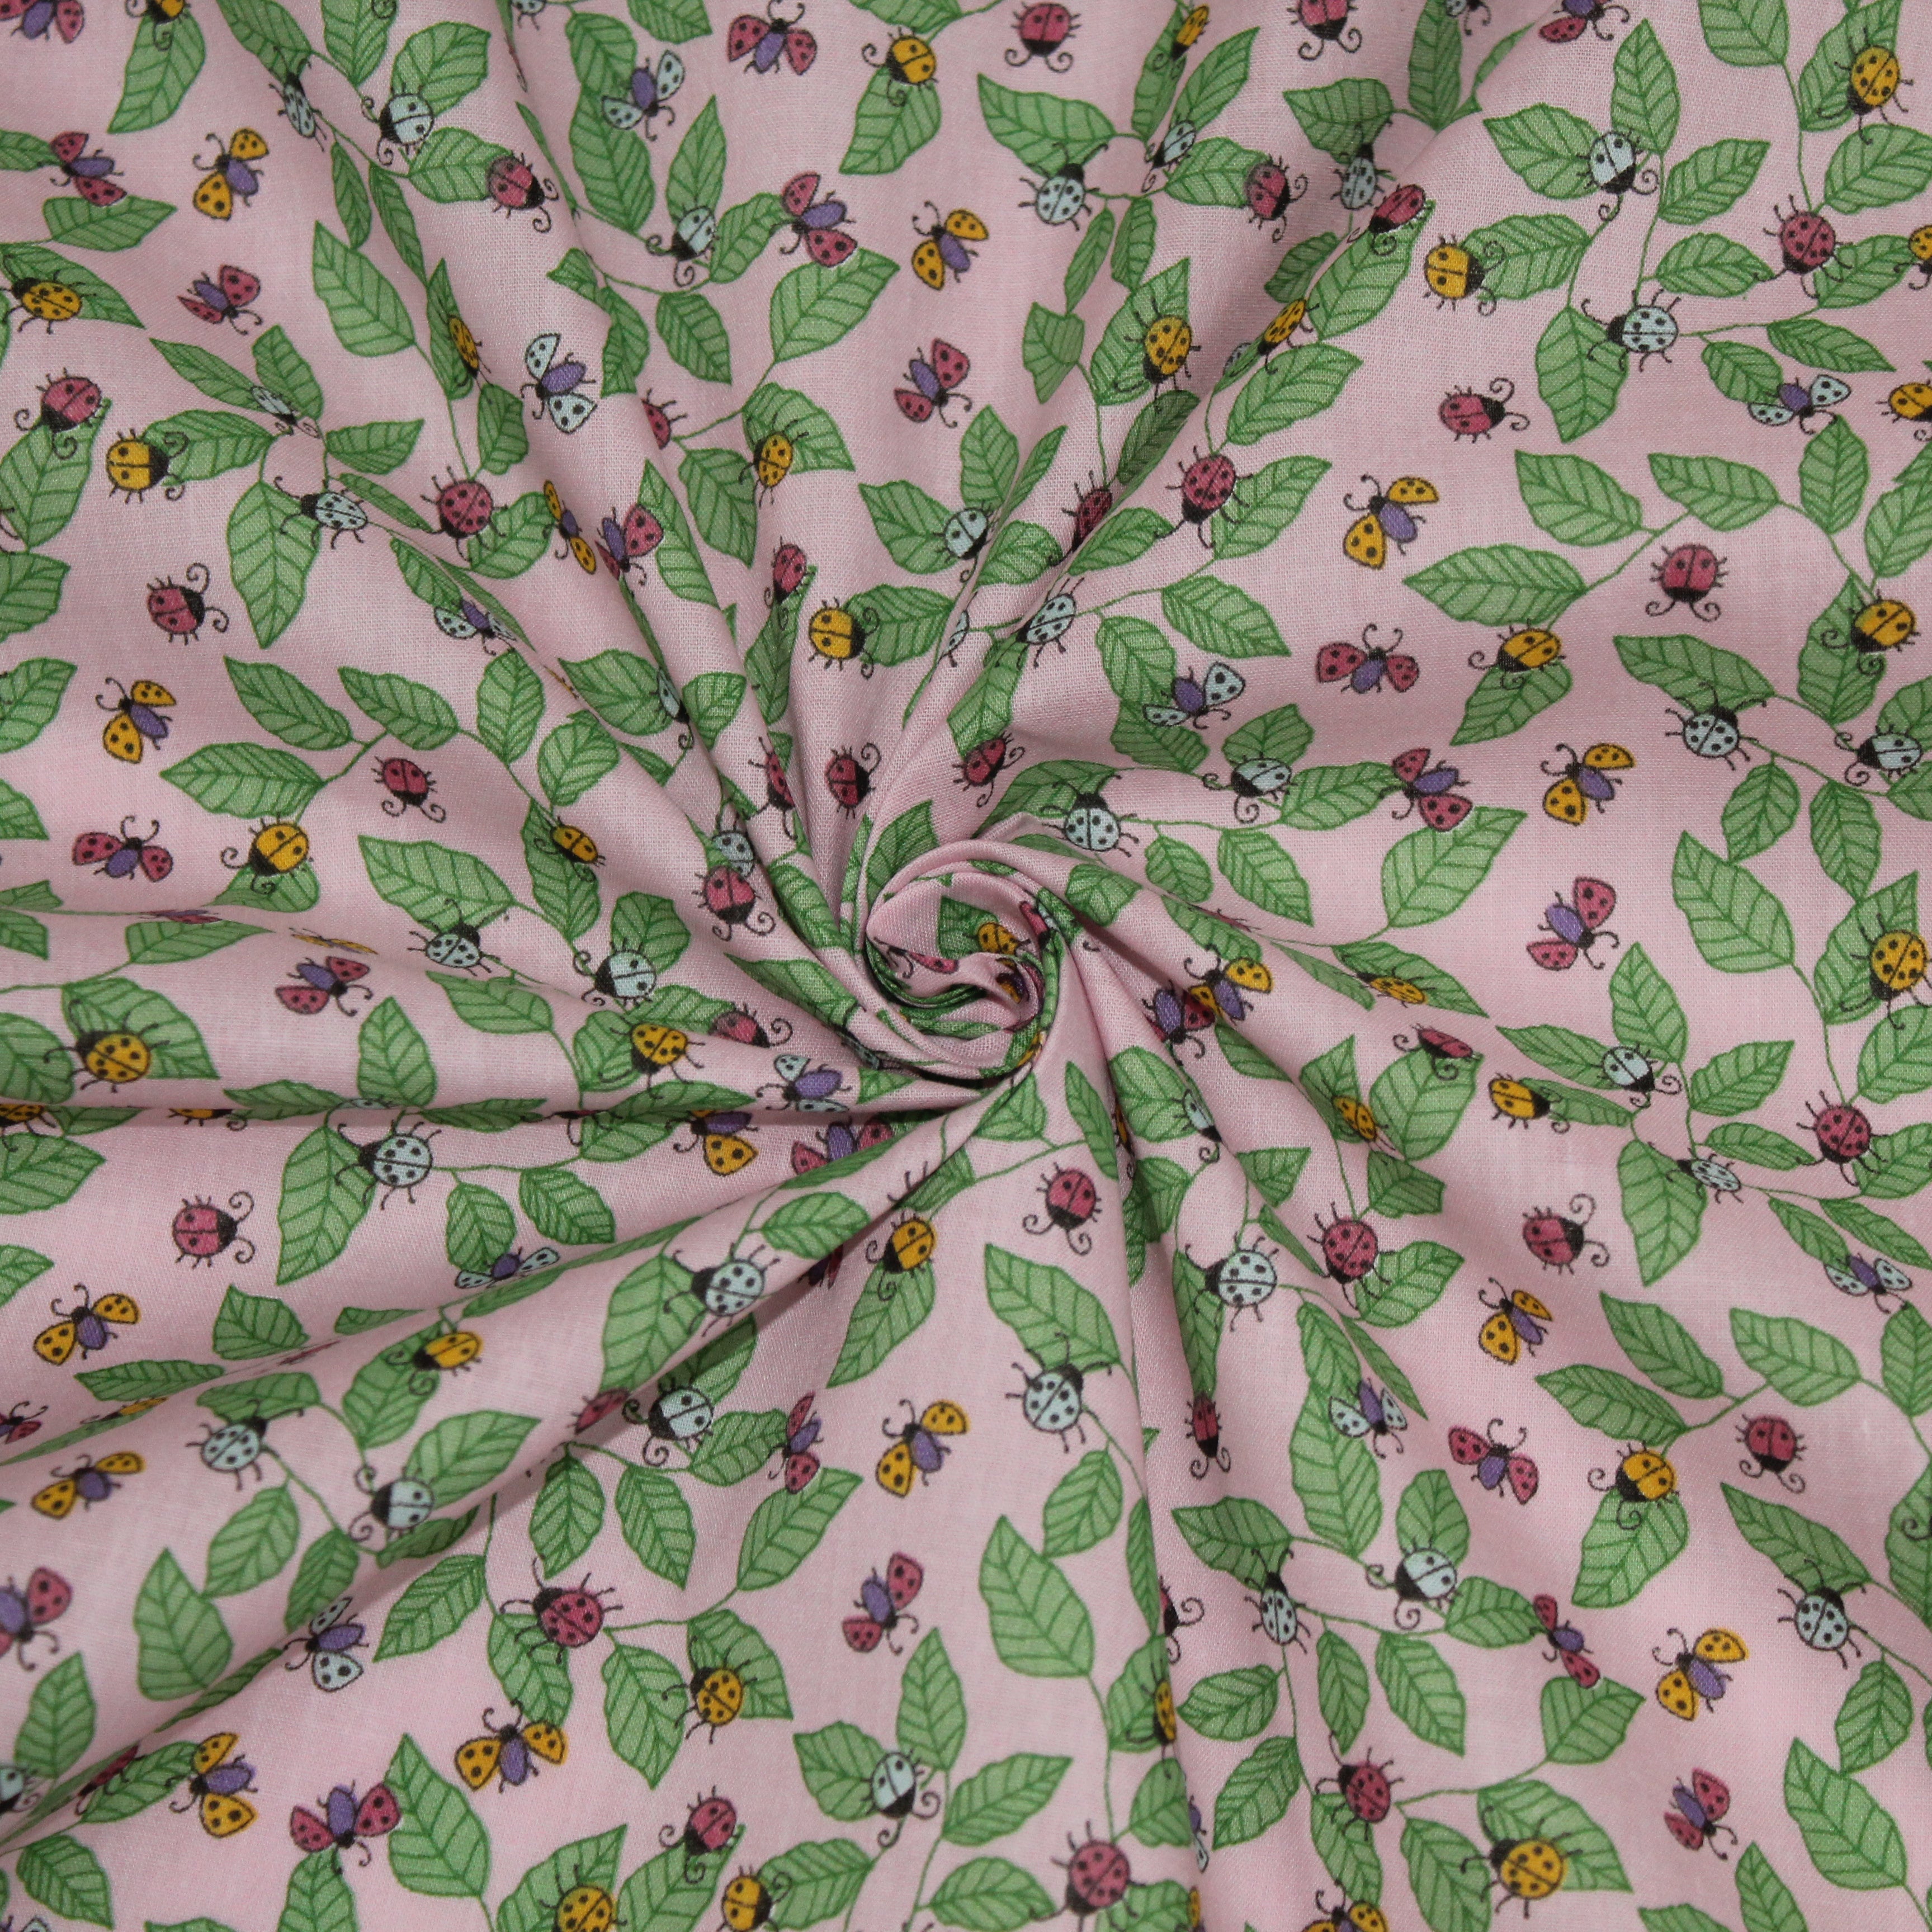 Premium Quality Poly-Cotton "Ladybird" 44" wide Pink